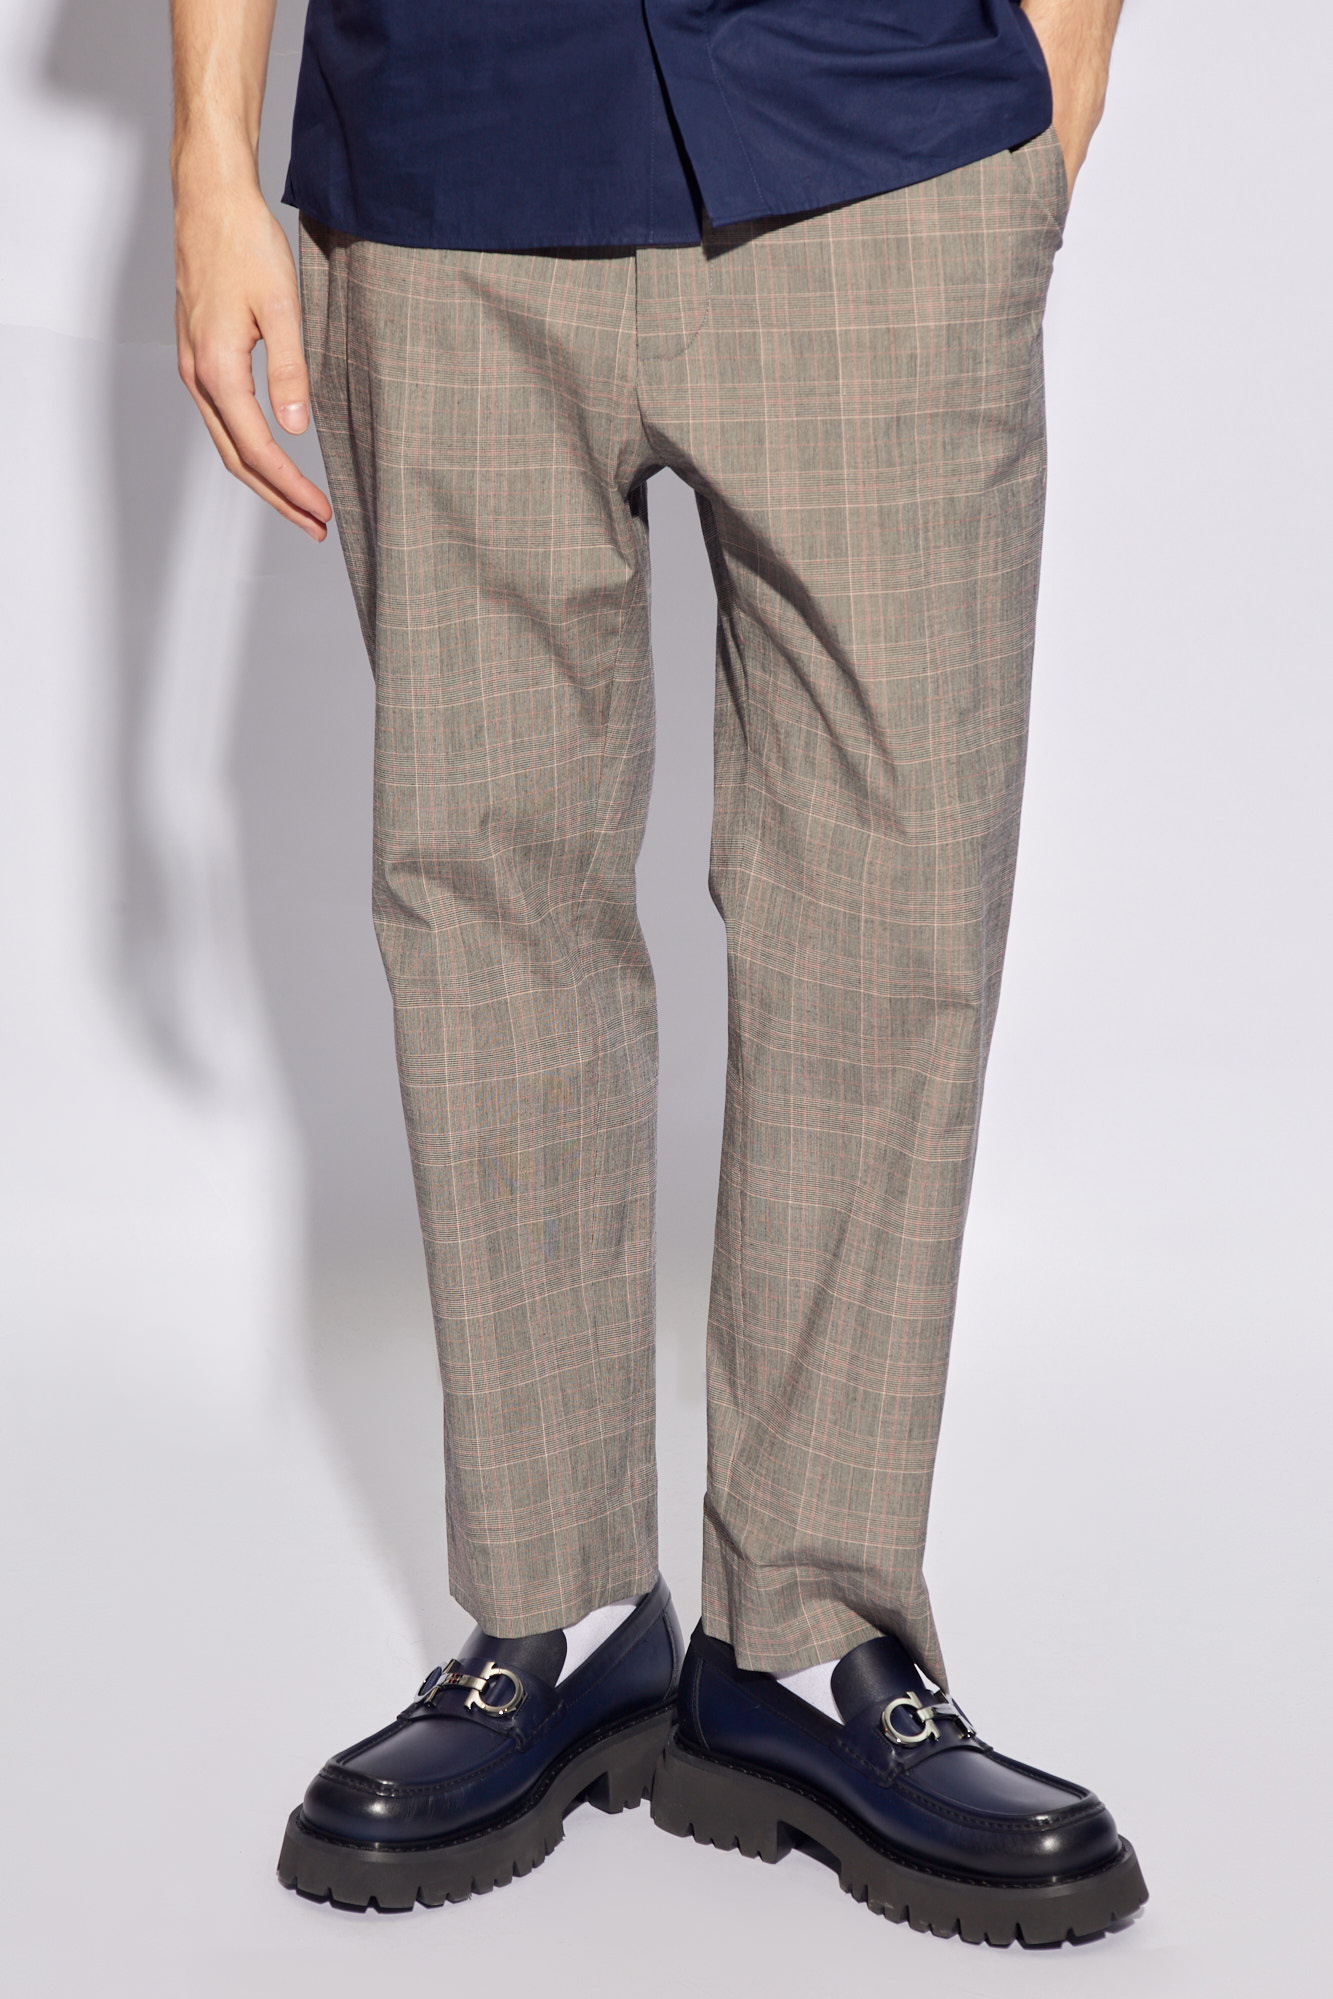 Vivienne Westwood ‘Cruise’ checked gathered trousers